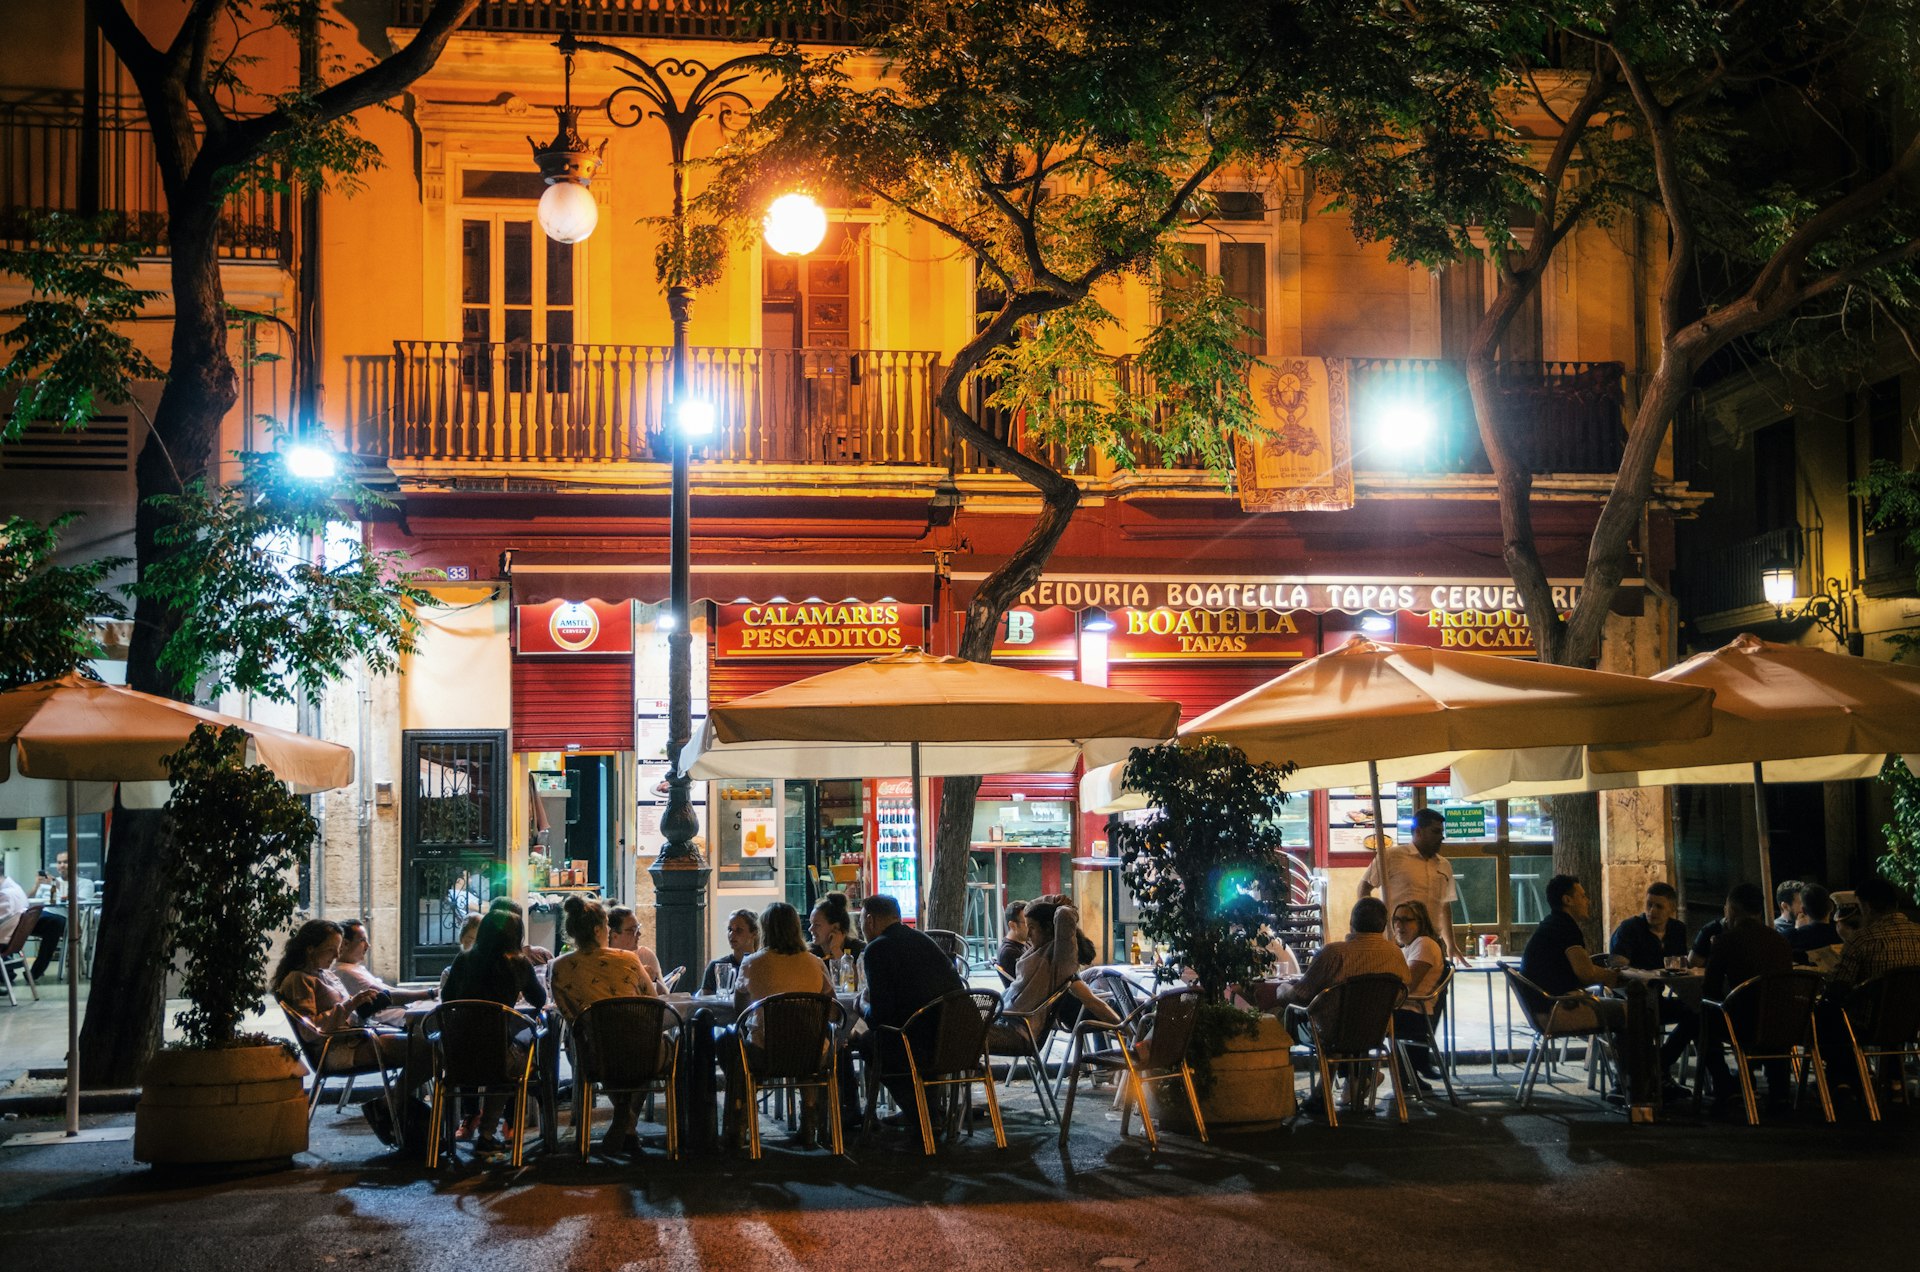 People sit outside a bar at tables and chairs in the evening